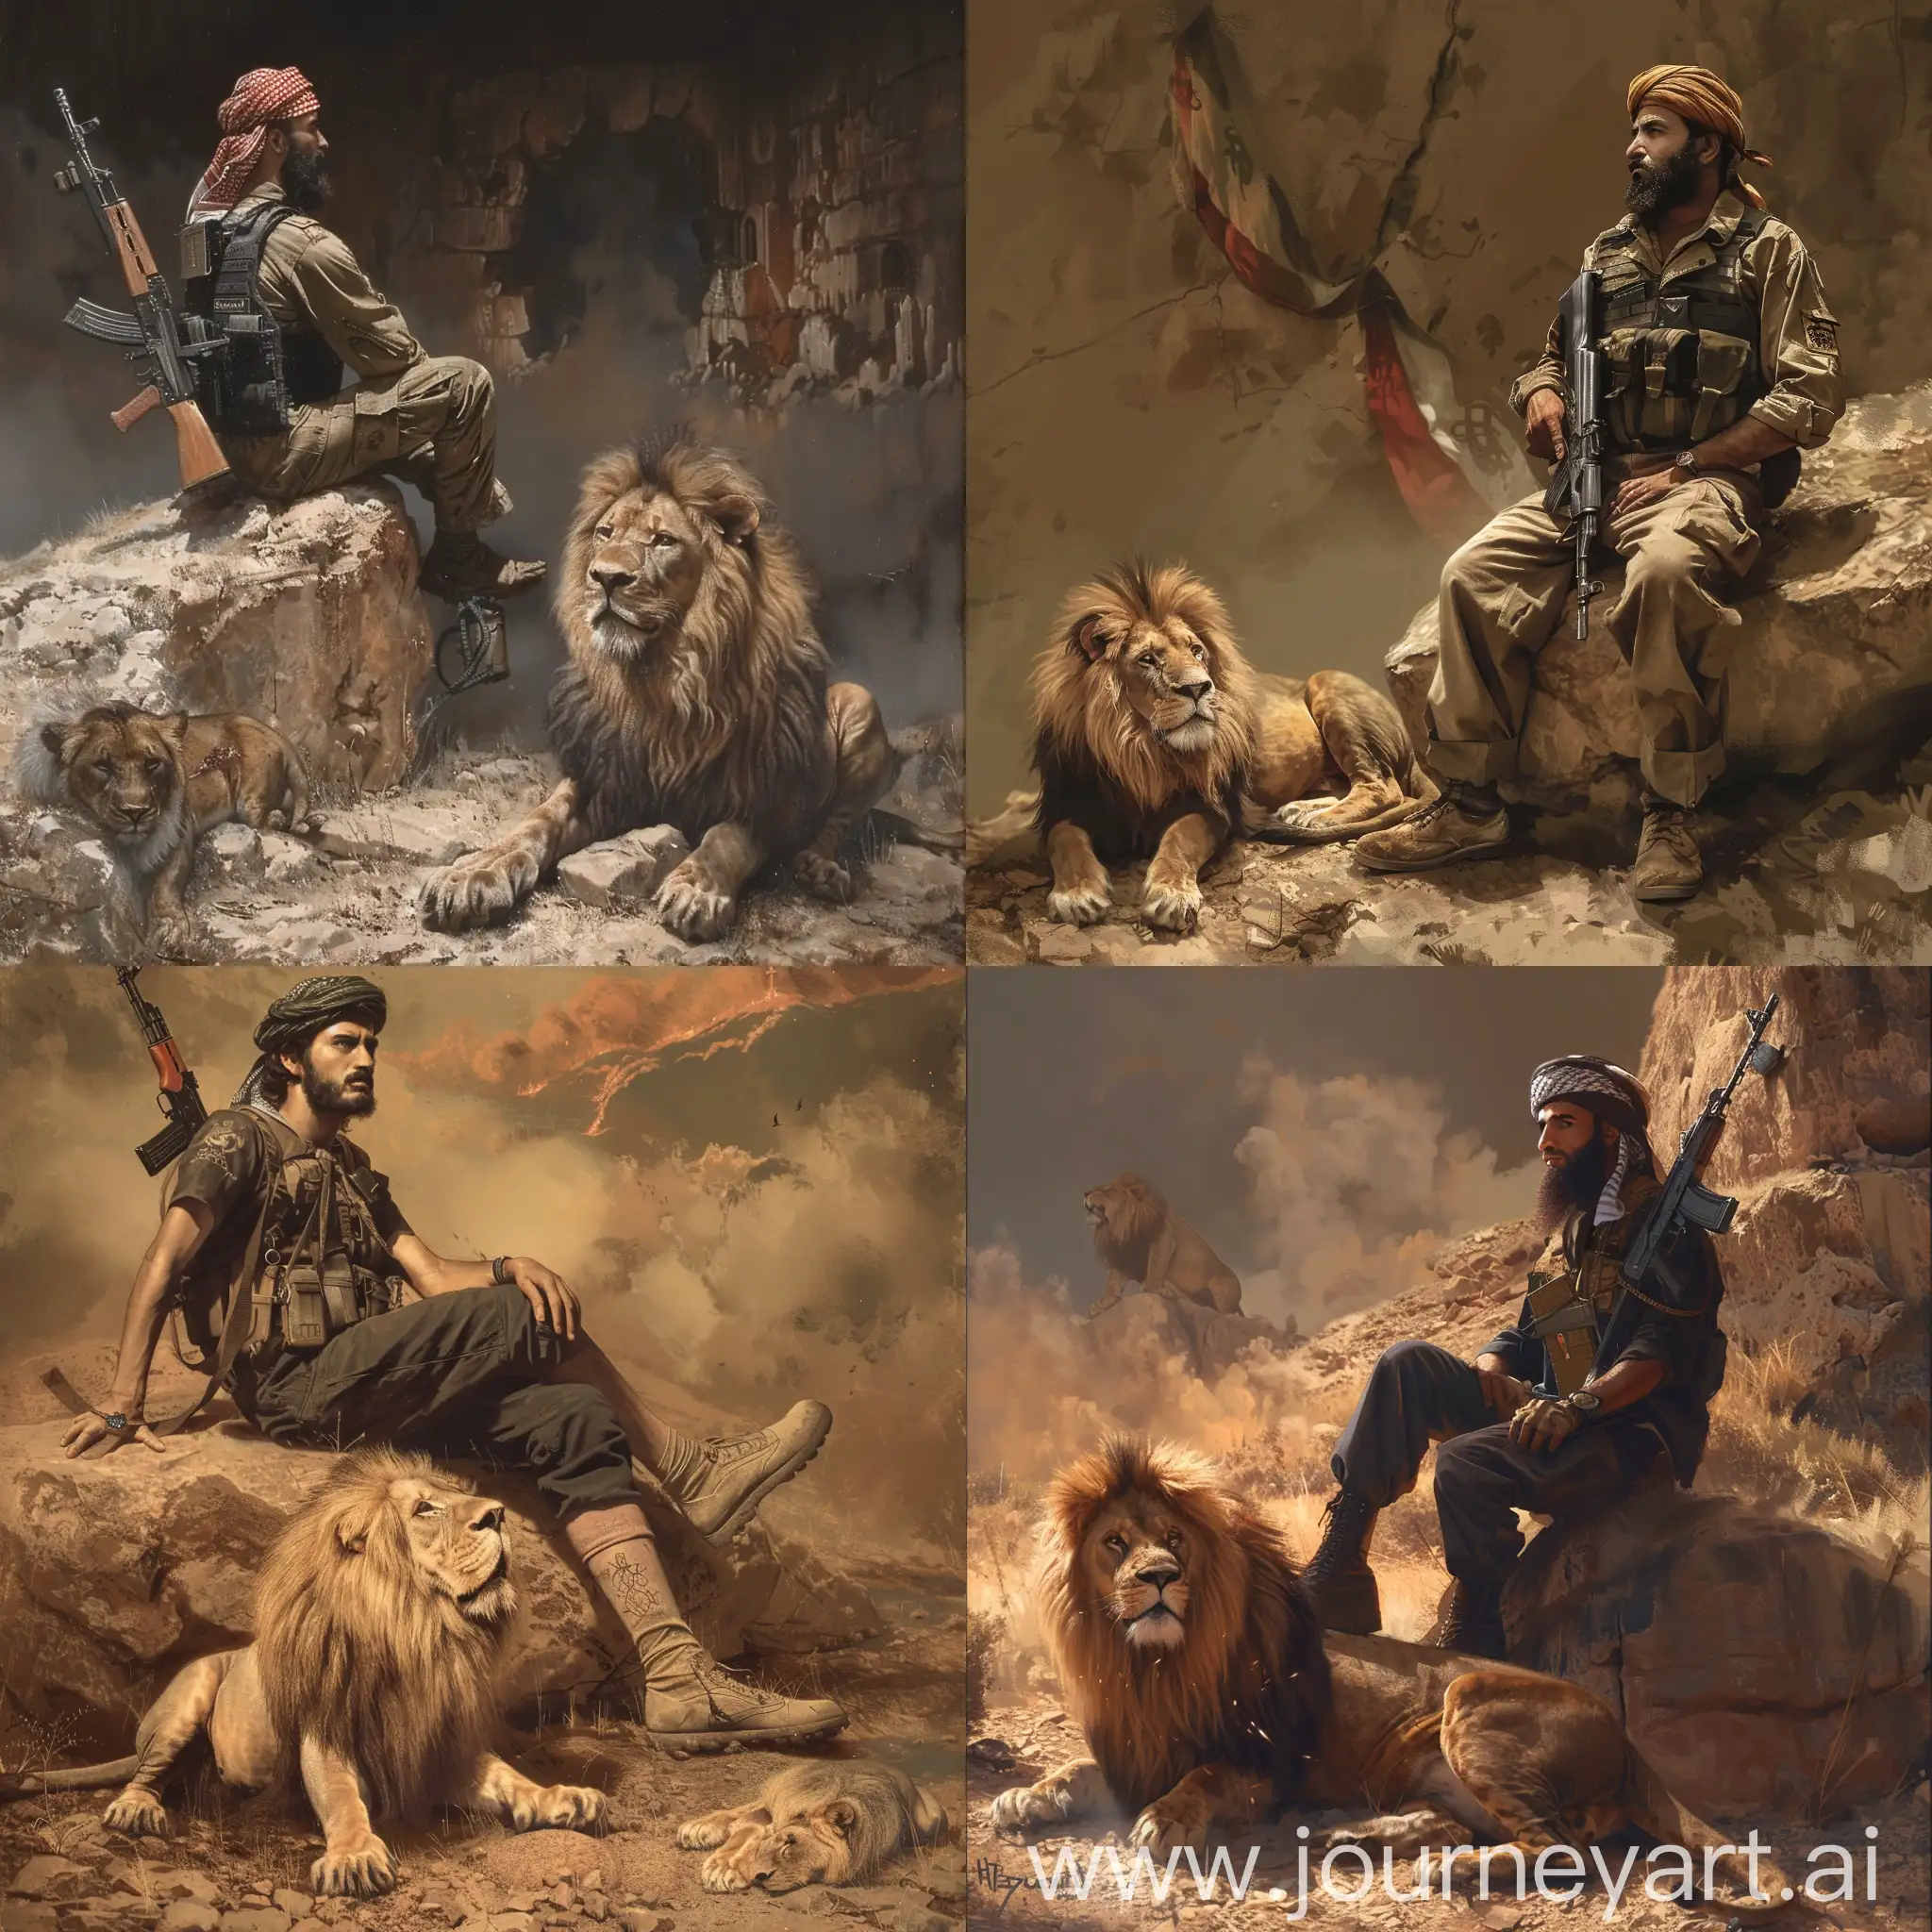 A Hezbollah fighter sits on a rock with a Kalashnikov on his thigh, and there is a lion sitting on the ground in front of the fighter